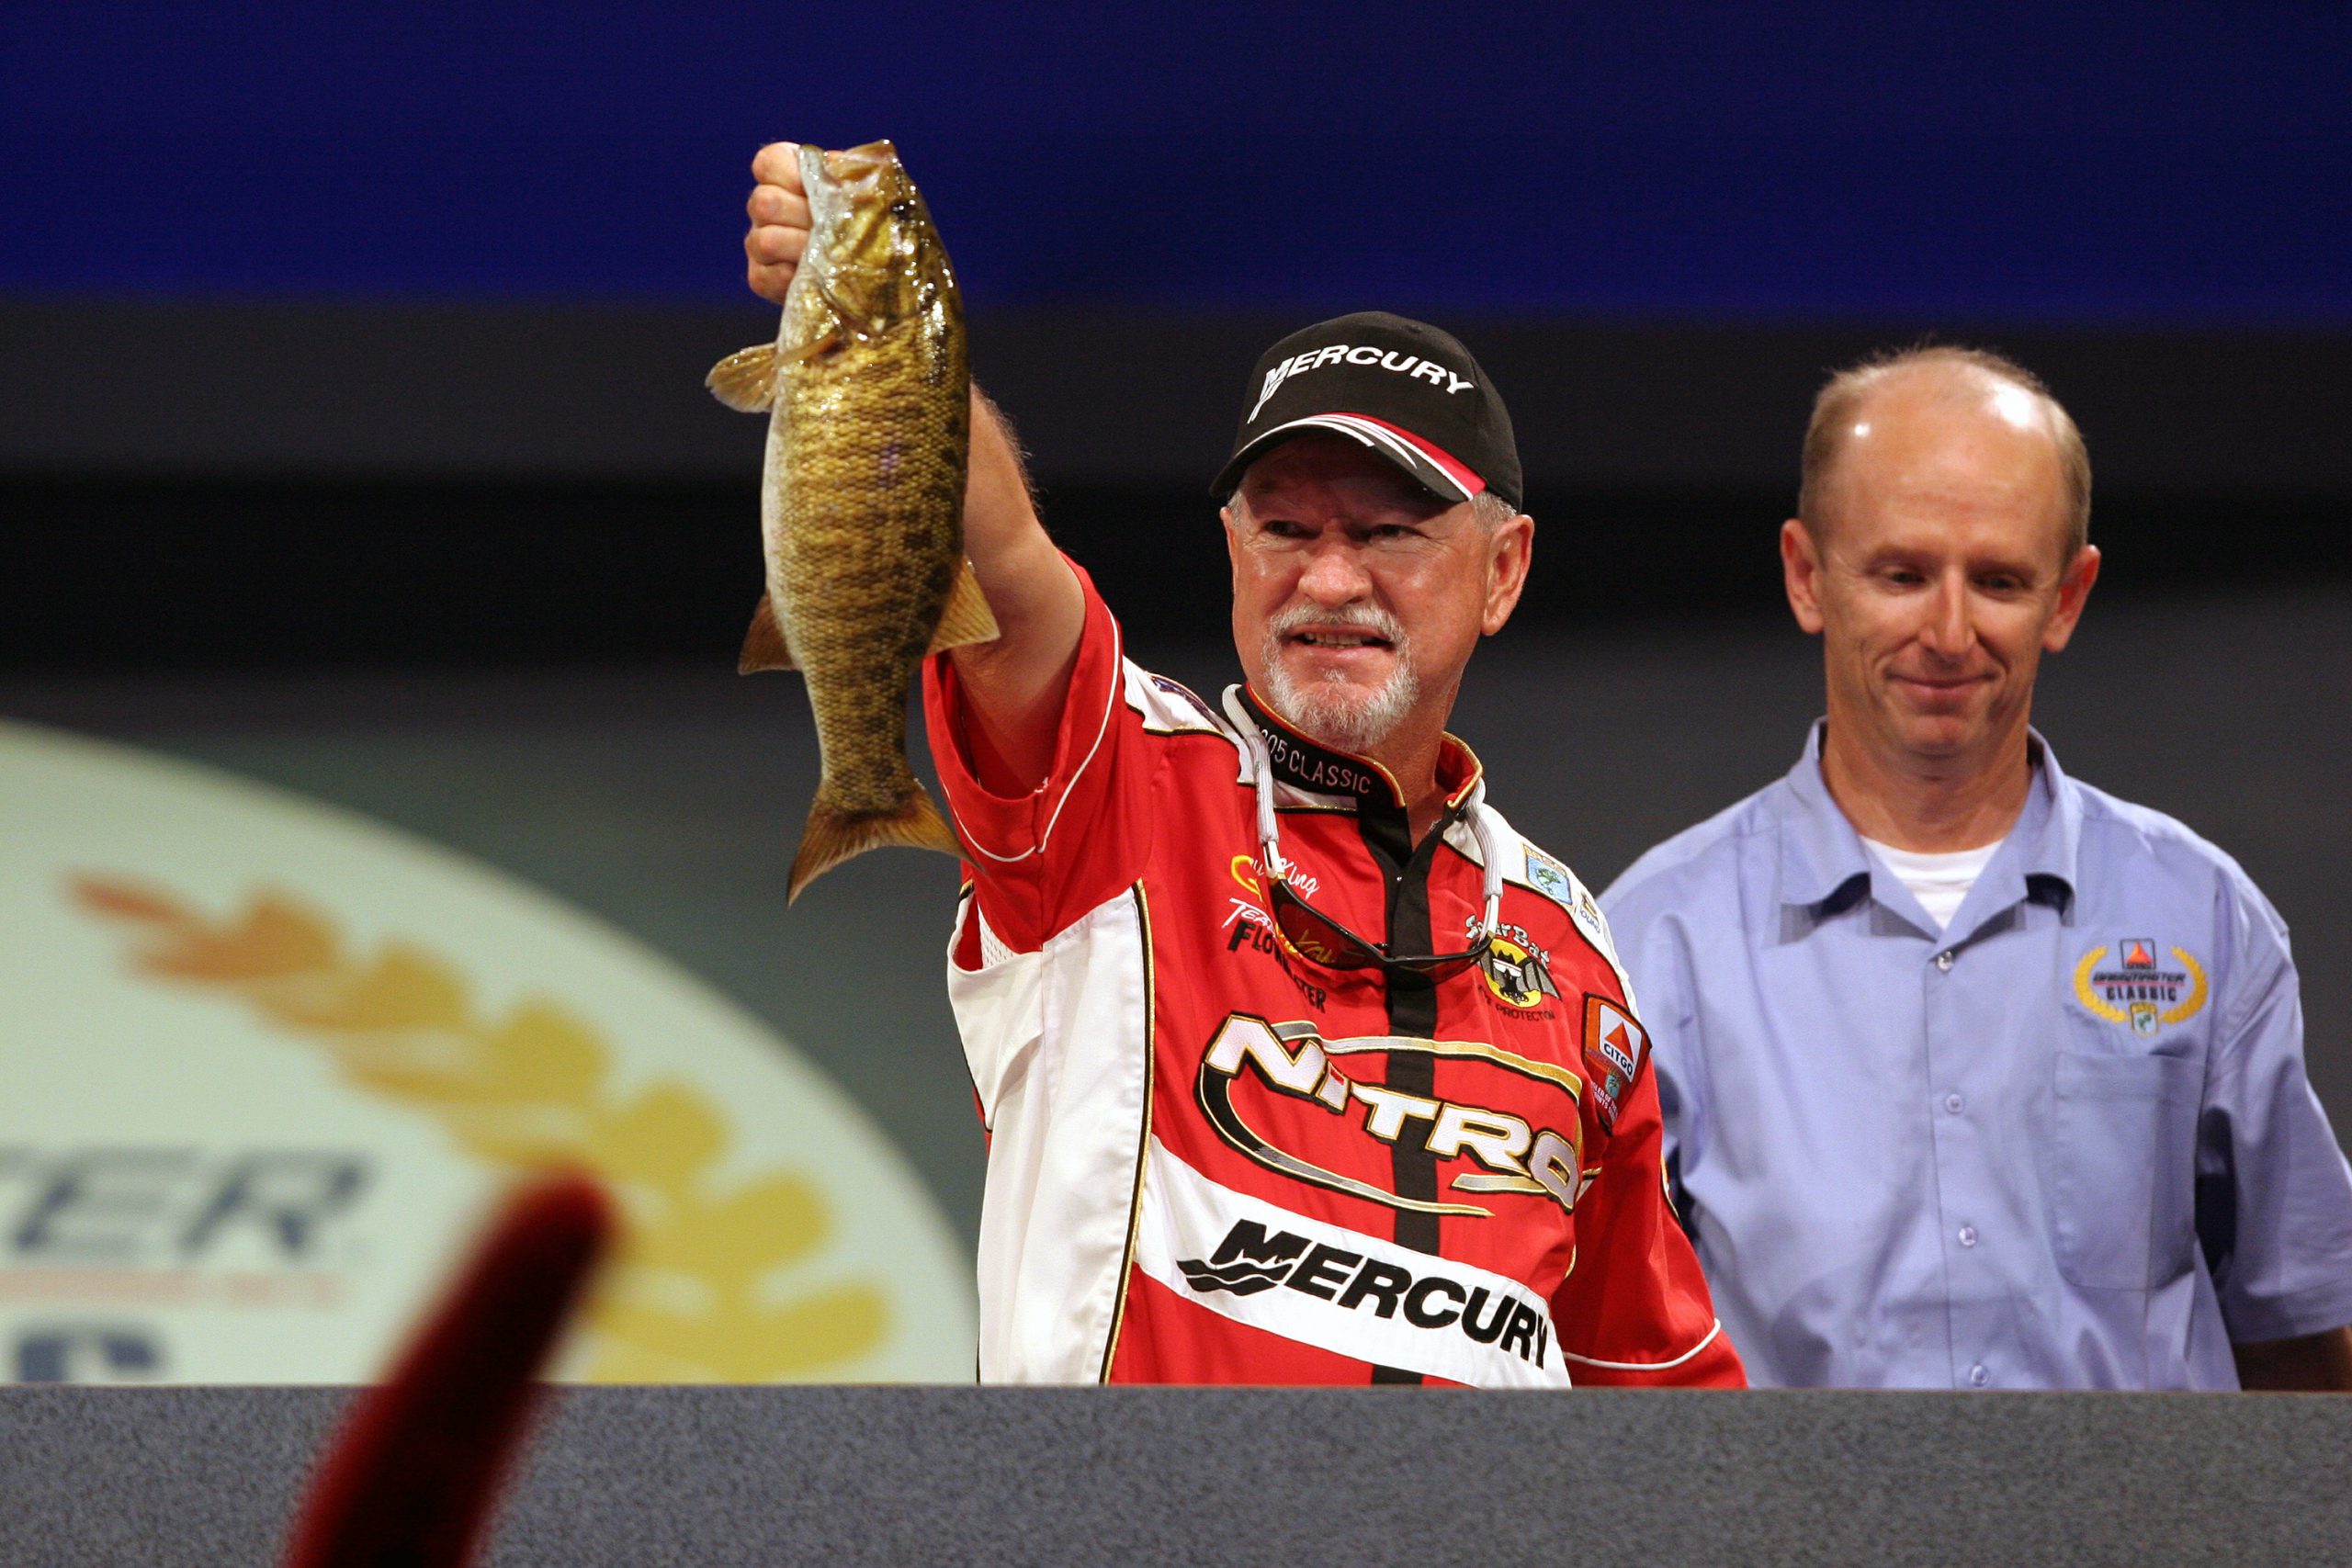 Stacey King: Facing the challenge of cancer - Major League Fishing